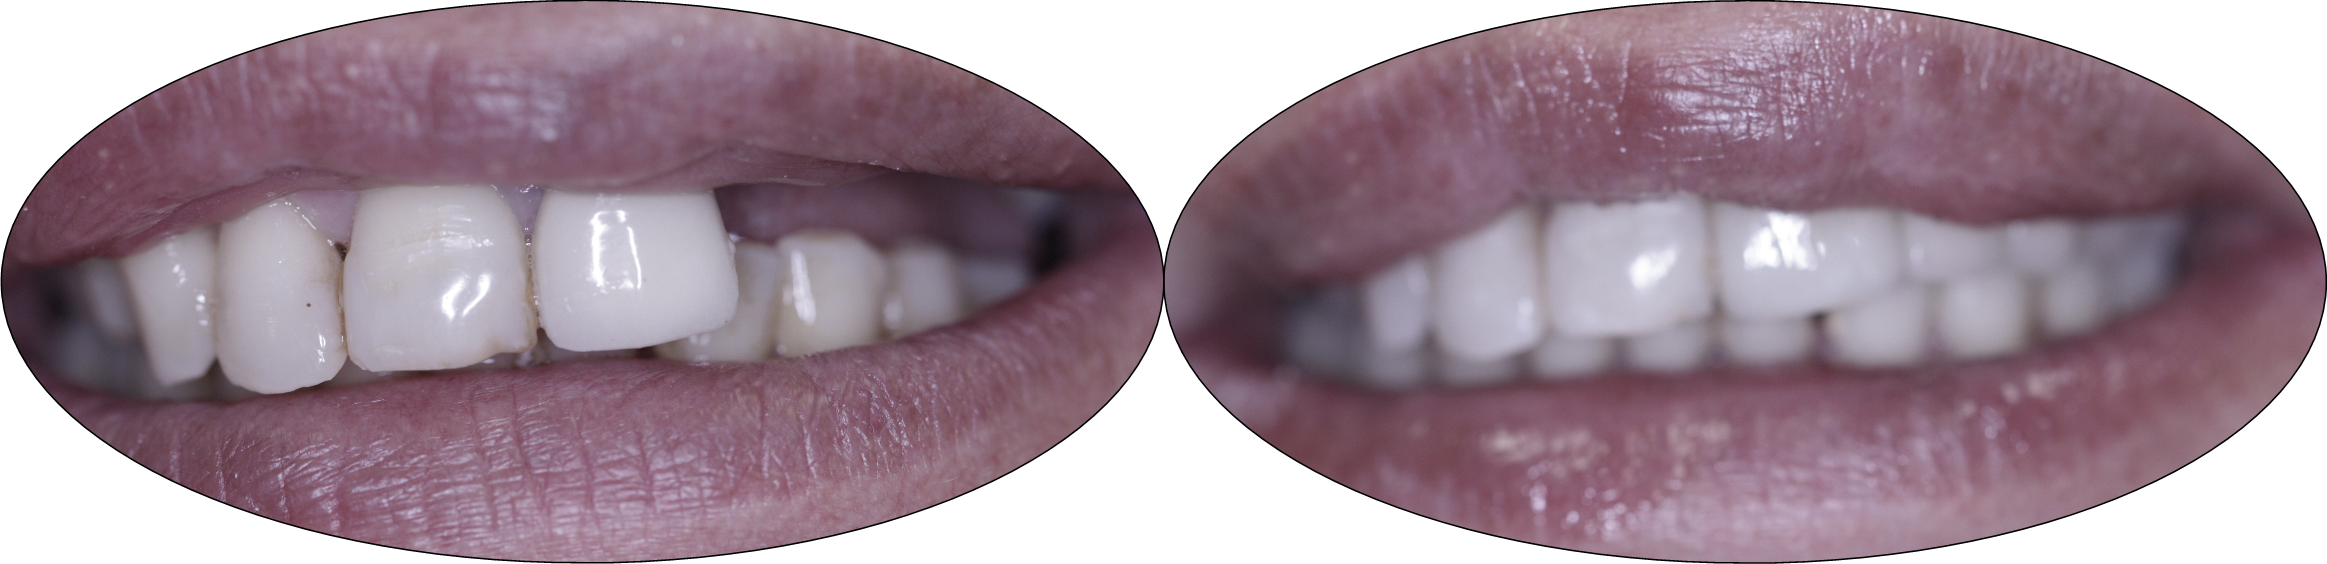 Before and after images of implant bridge placement